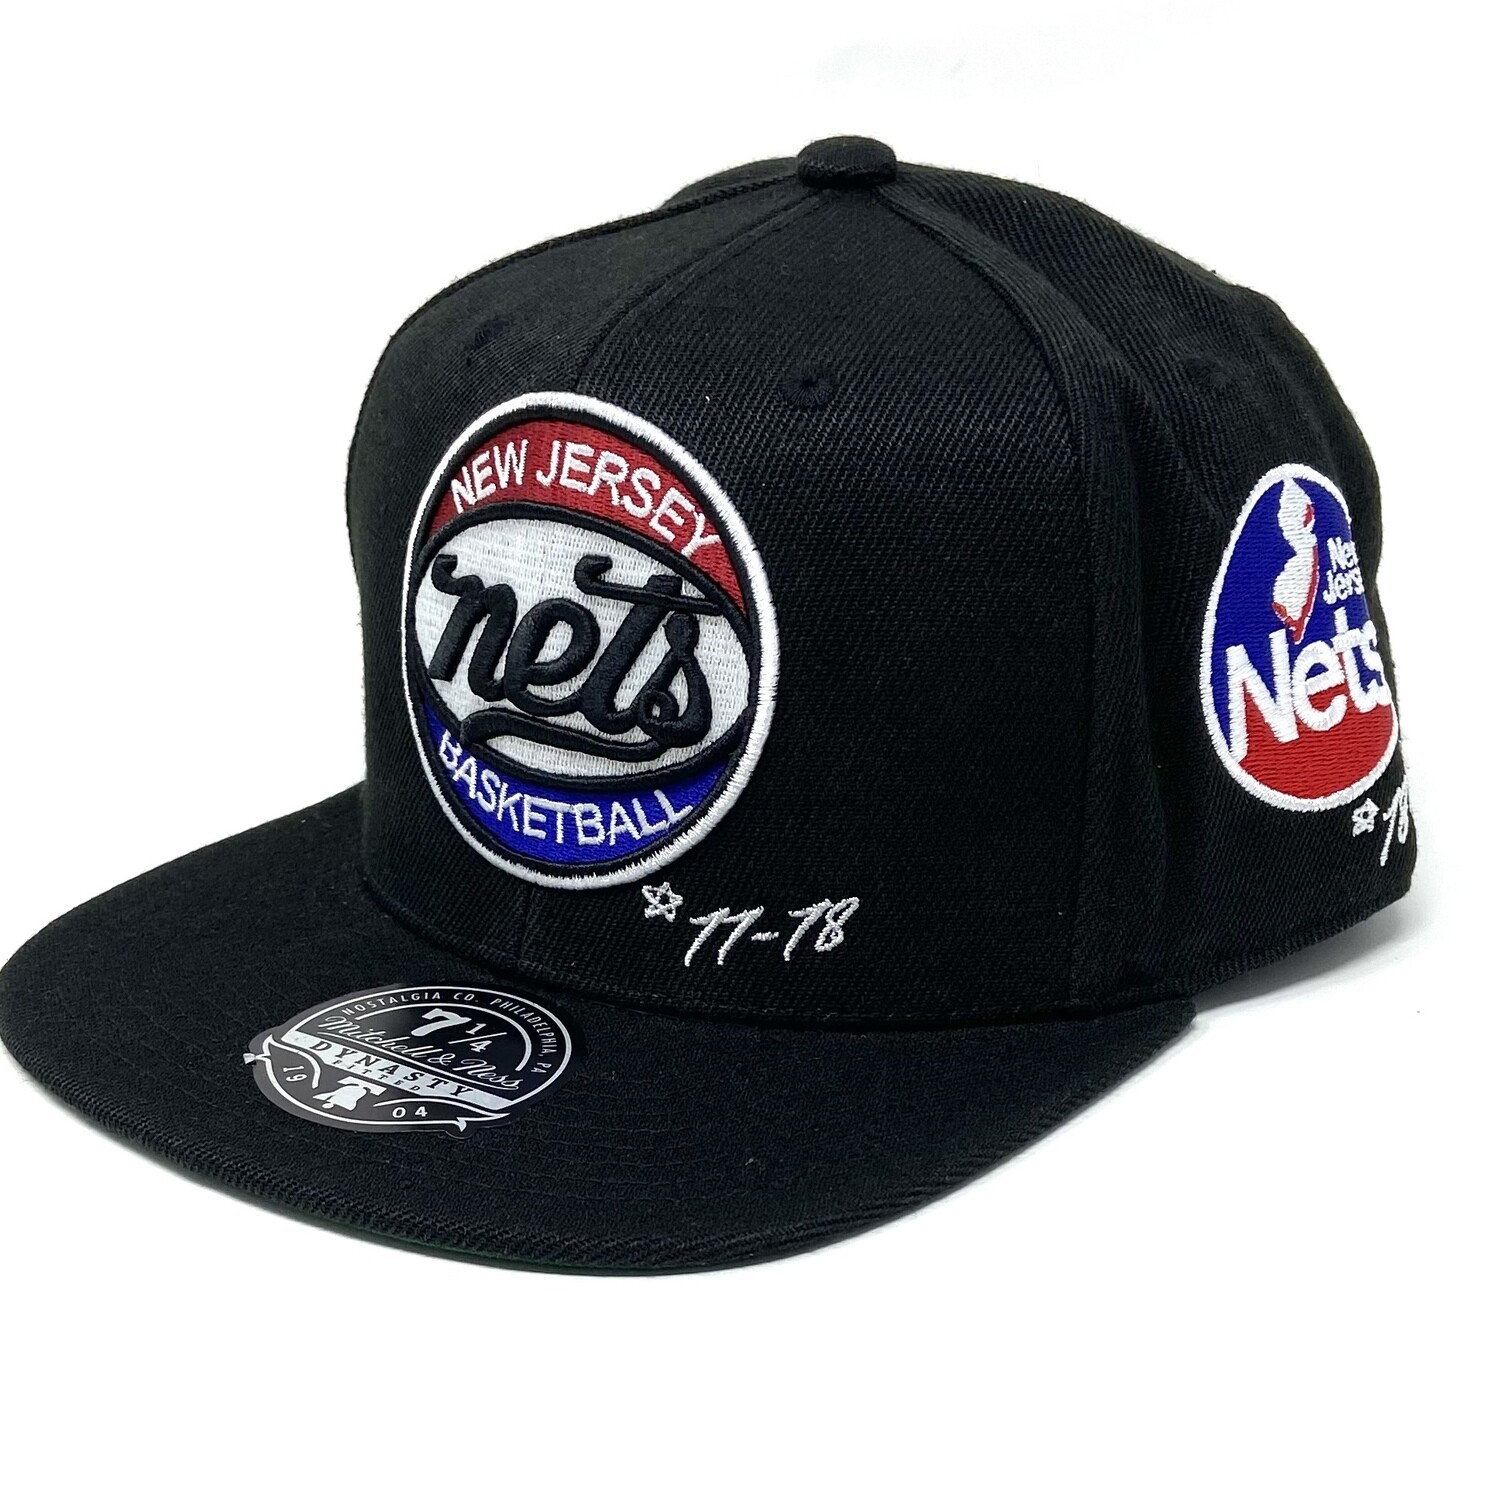 New Jersey Nets NBA Men's Classics Timeline Fitted Hat